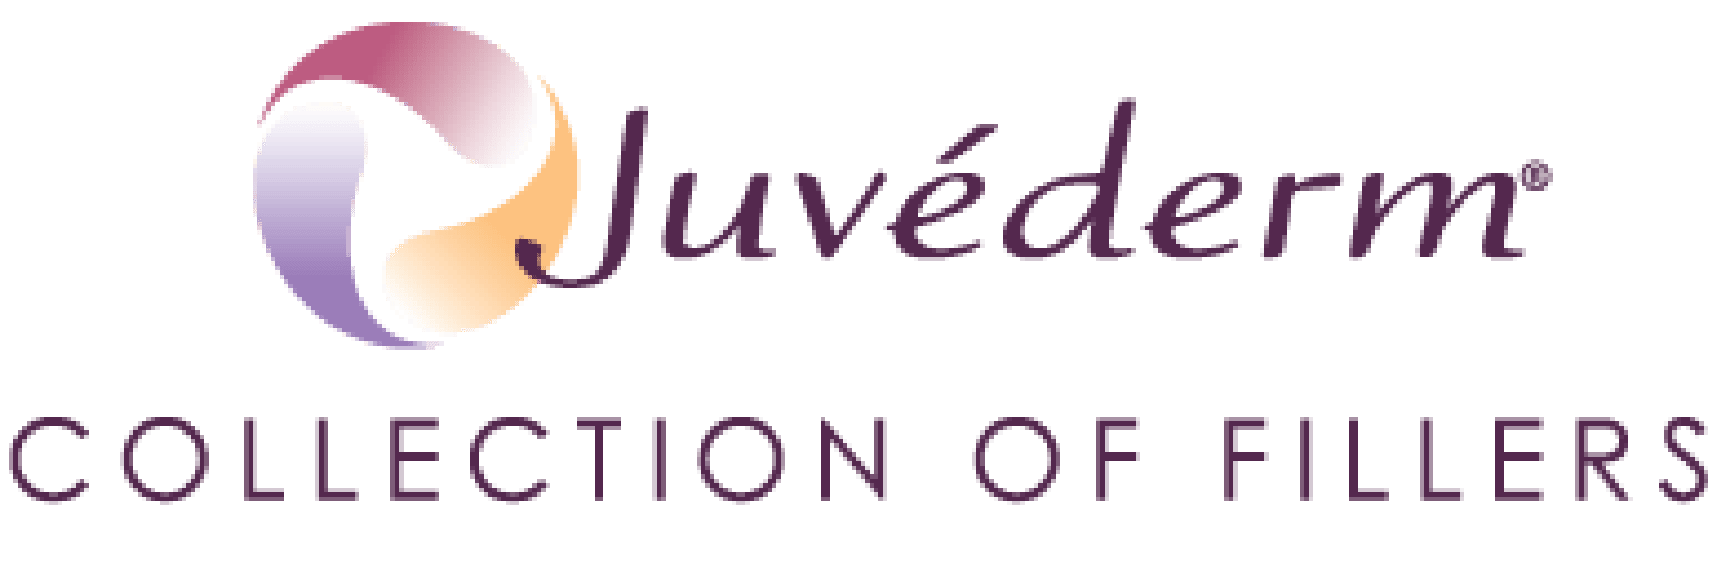 Juvederm collection of fillers.